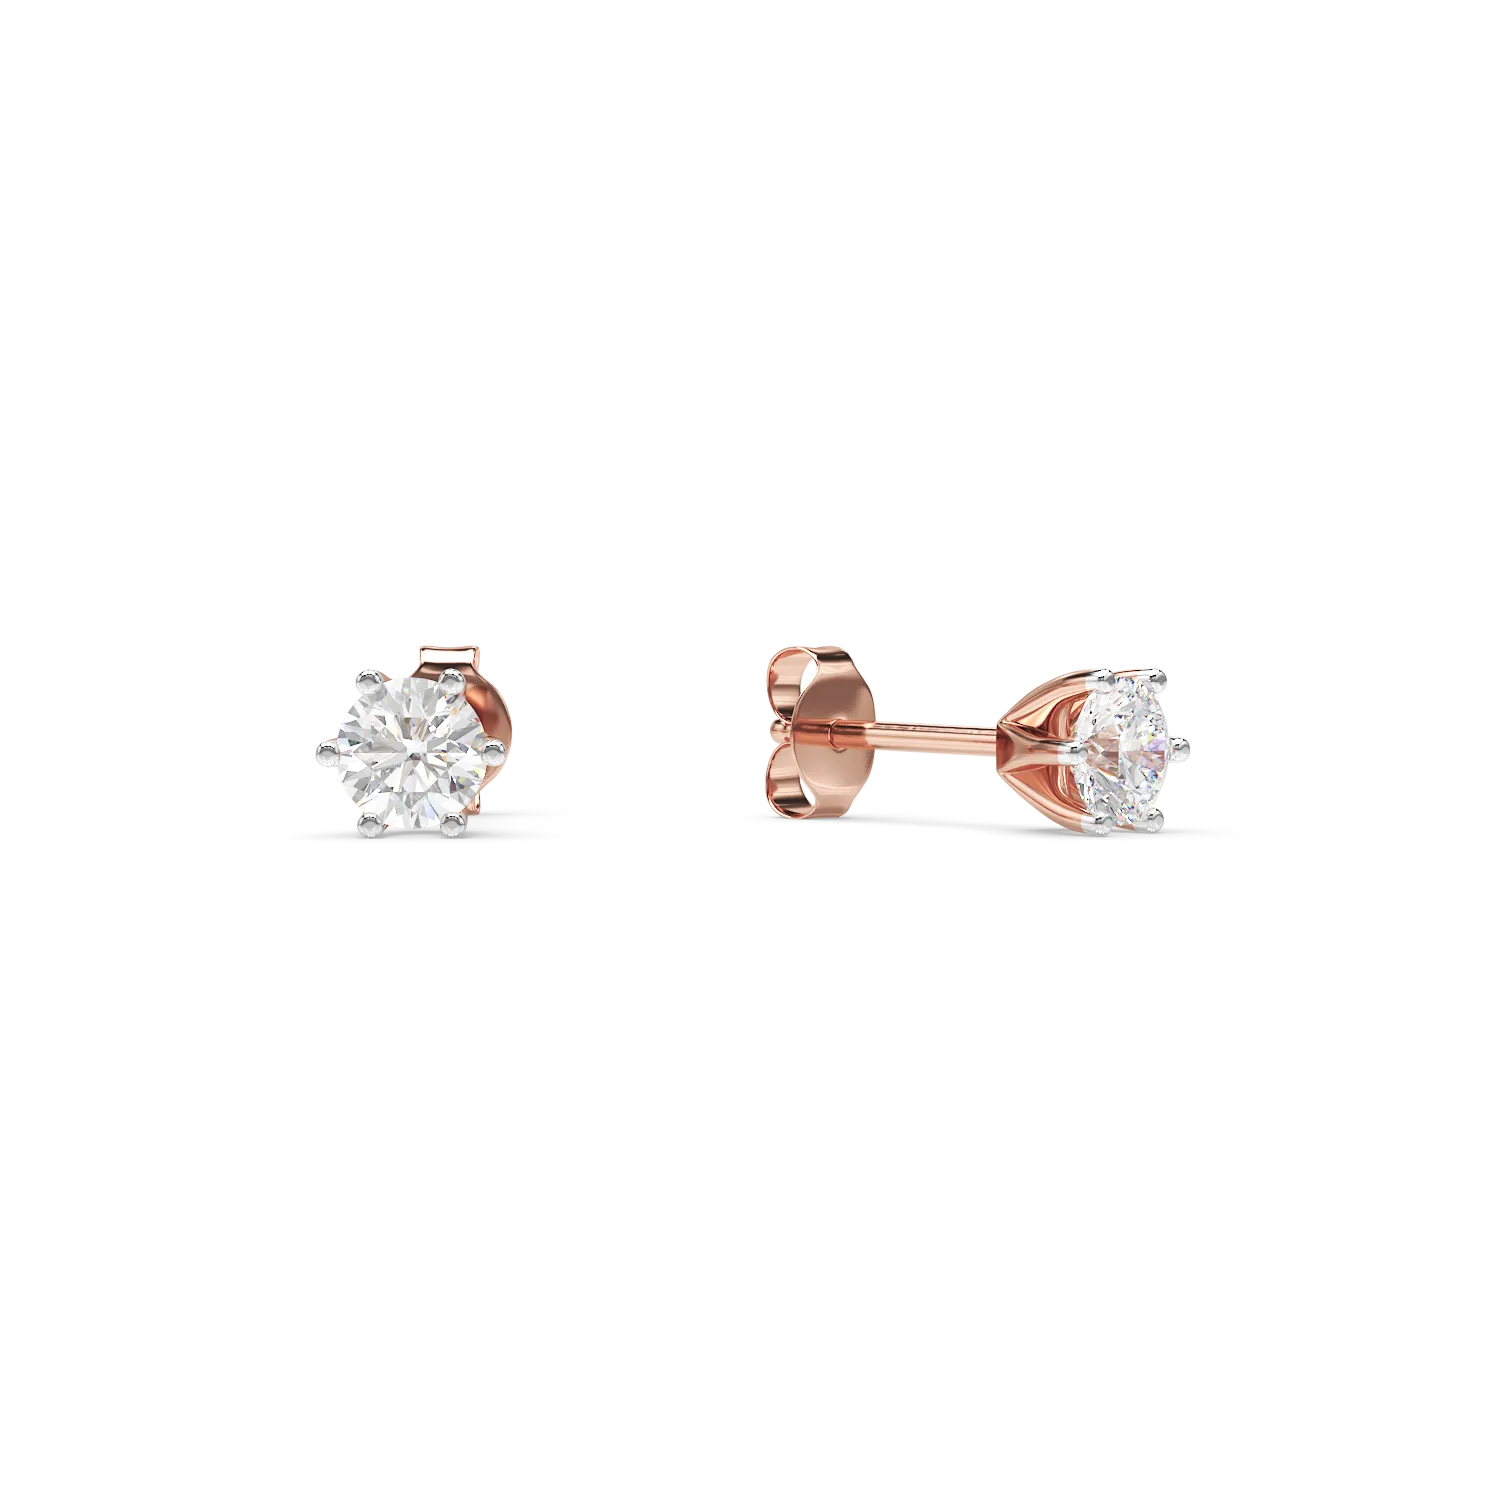 Rose gold earrings with 0.3ct solitaire diamonds